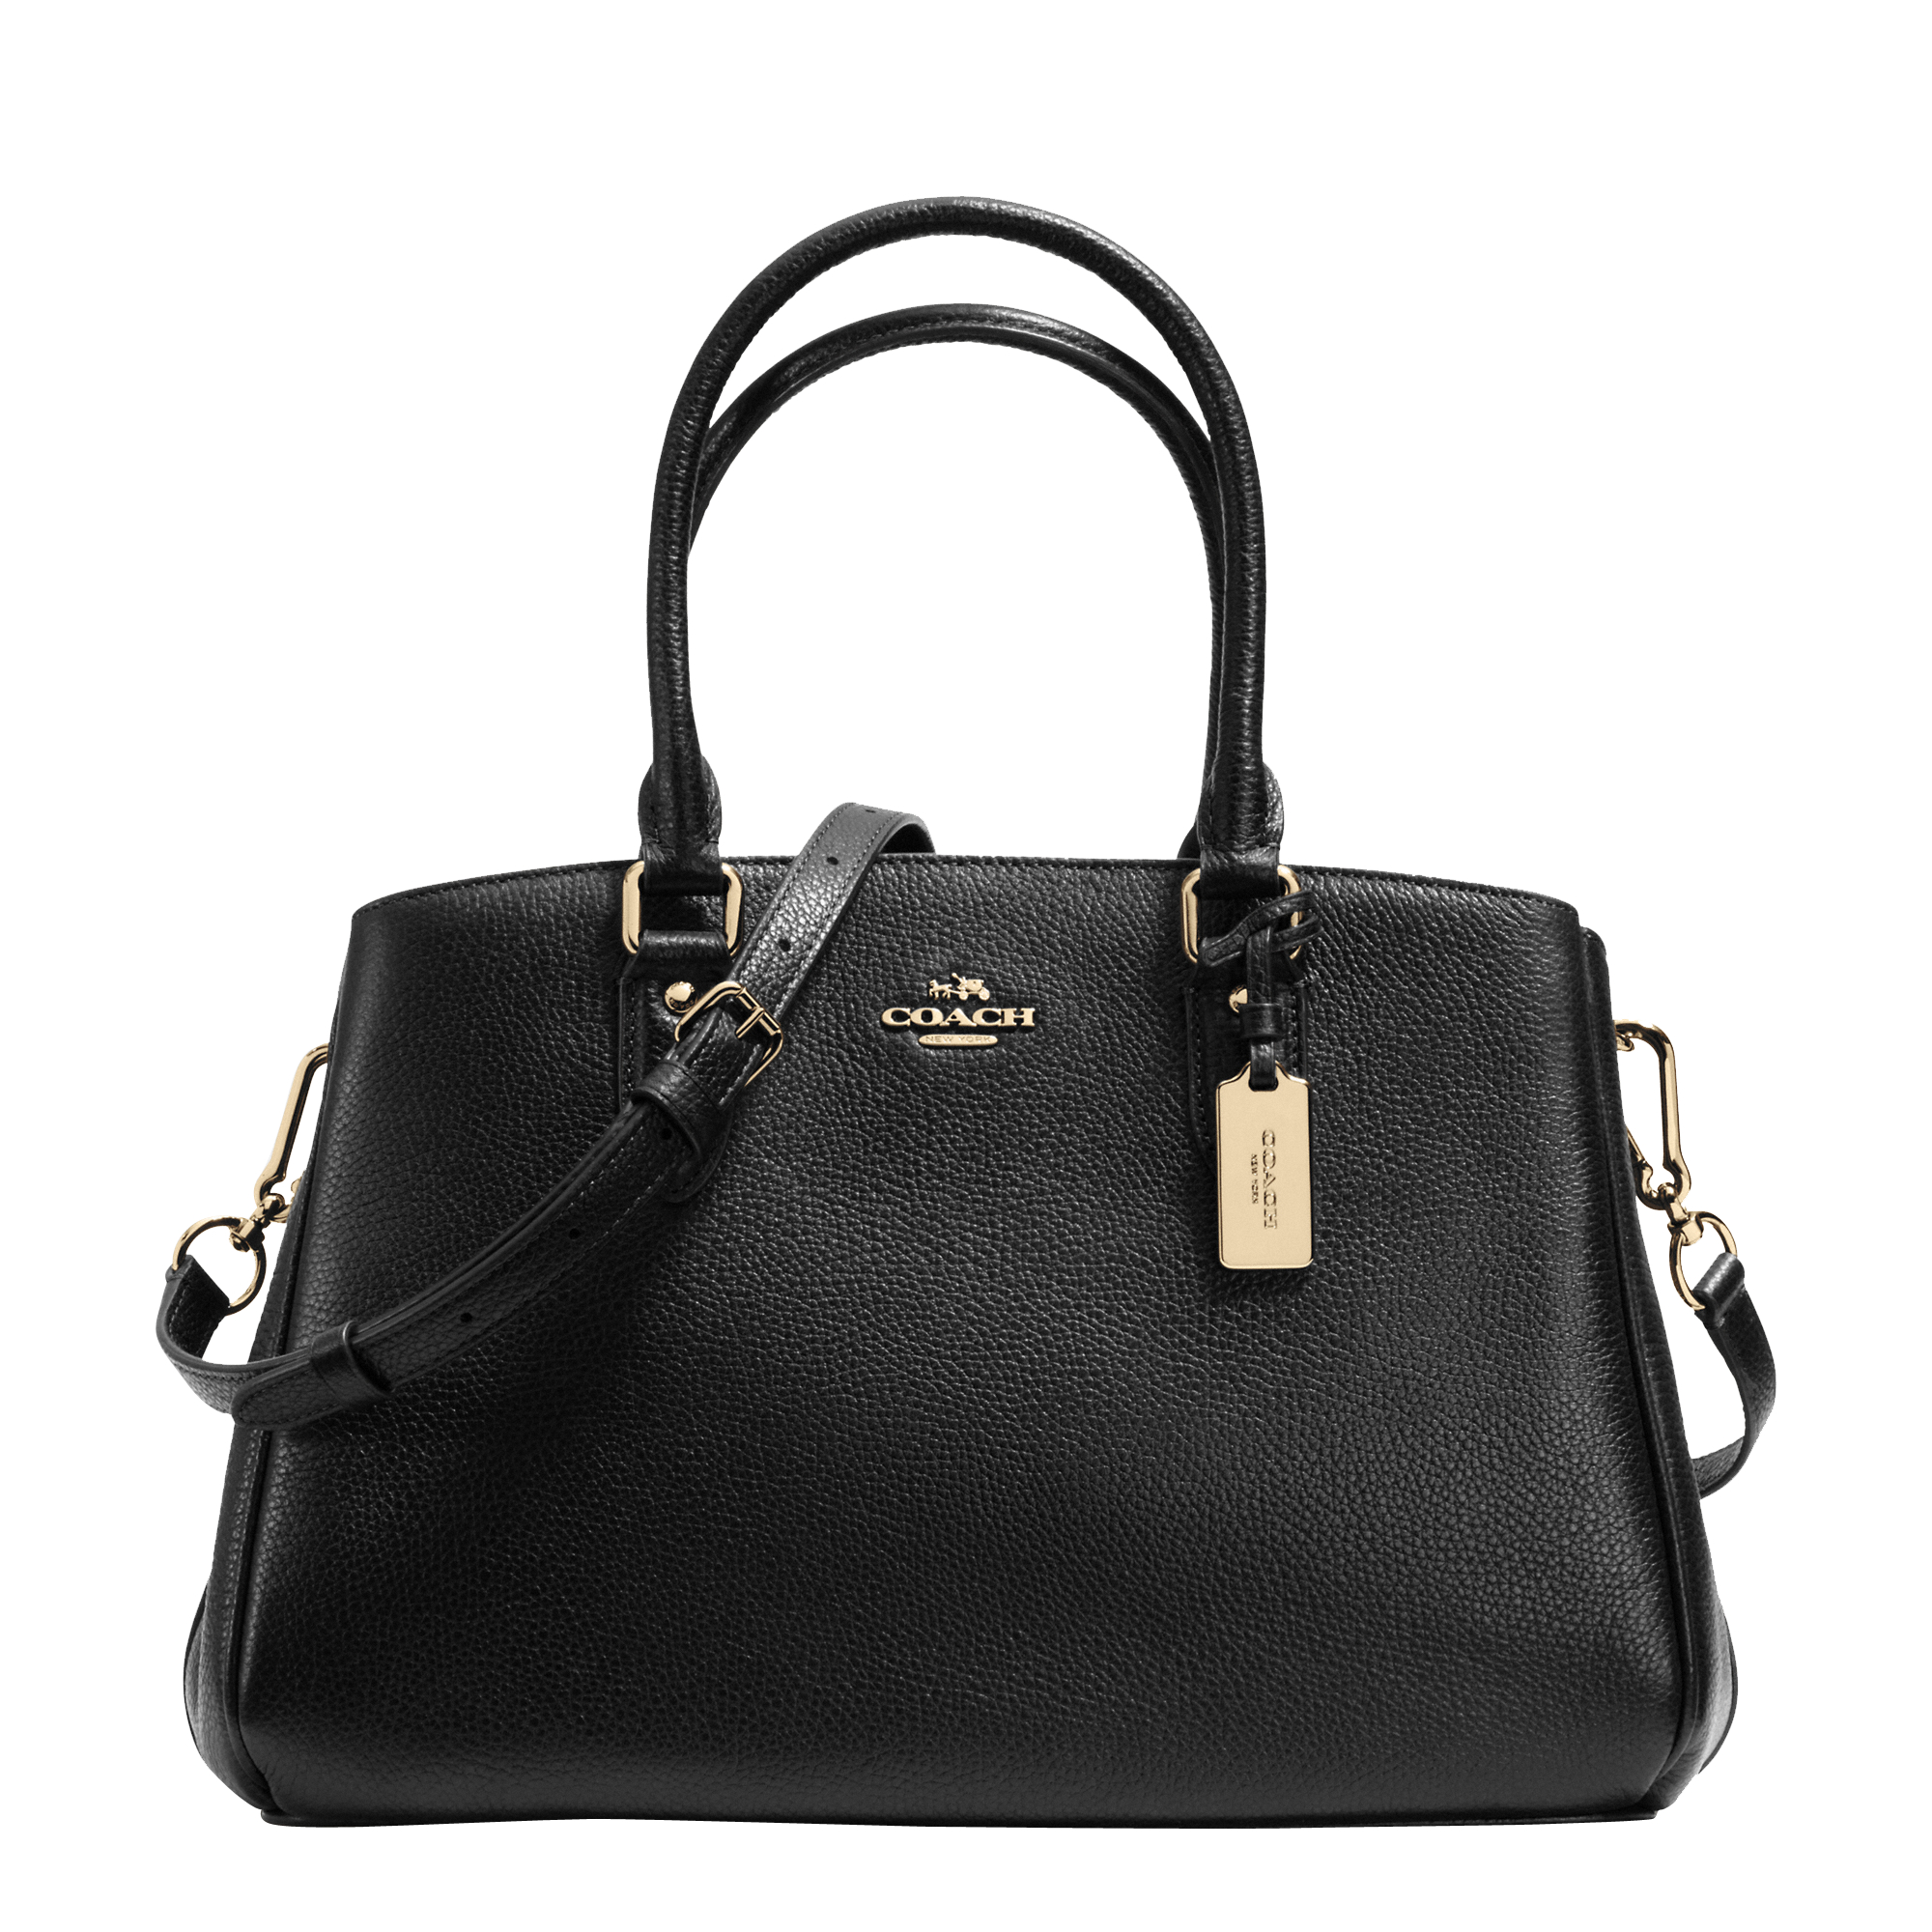 Lyst - Coach Empire Carryall in Black